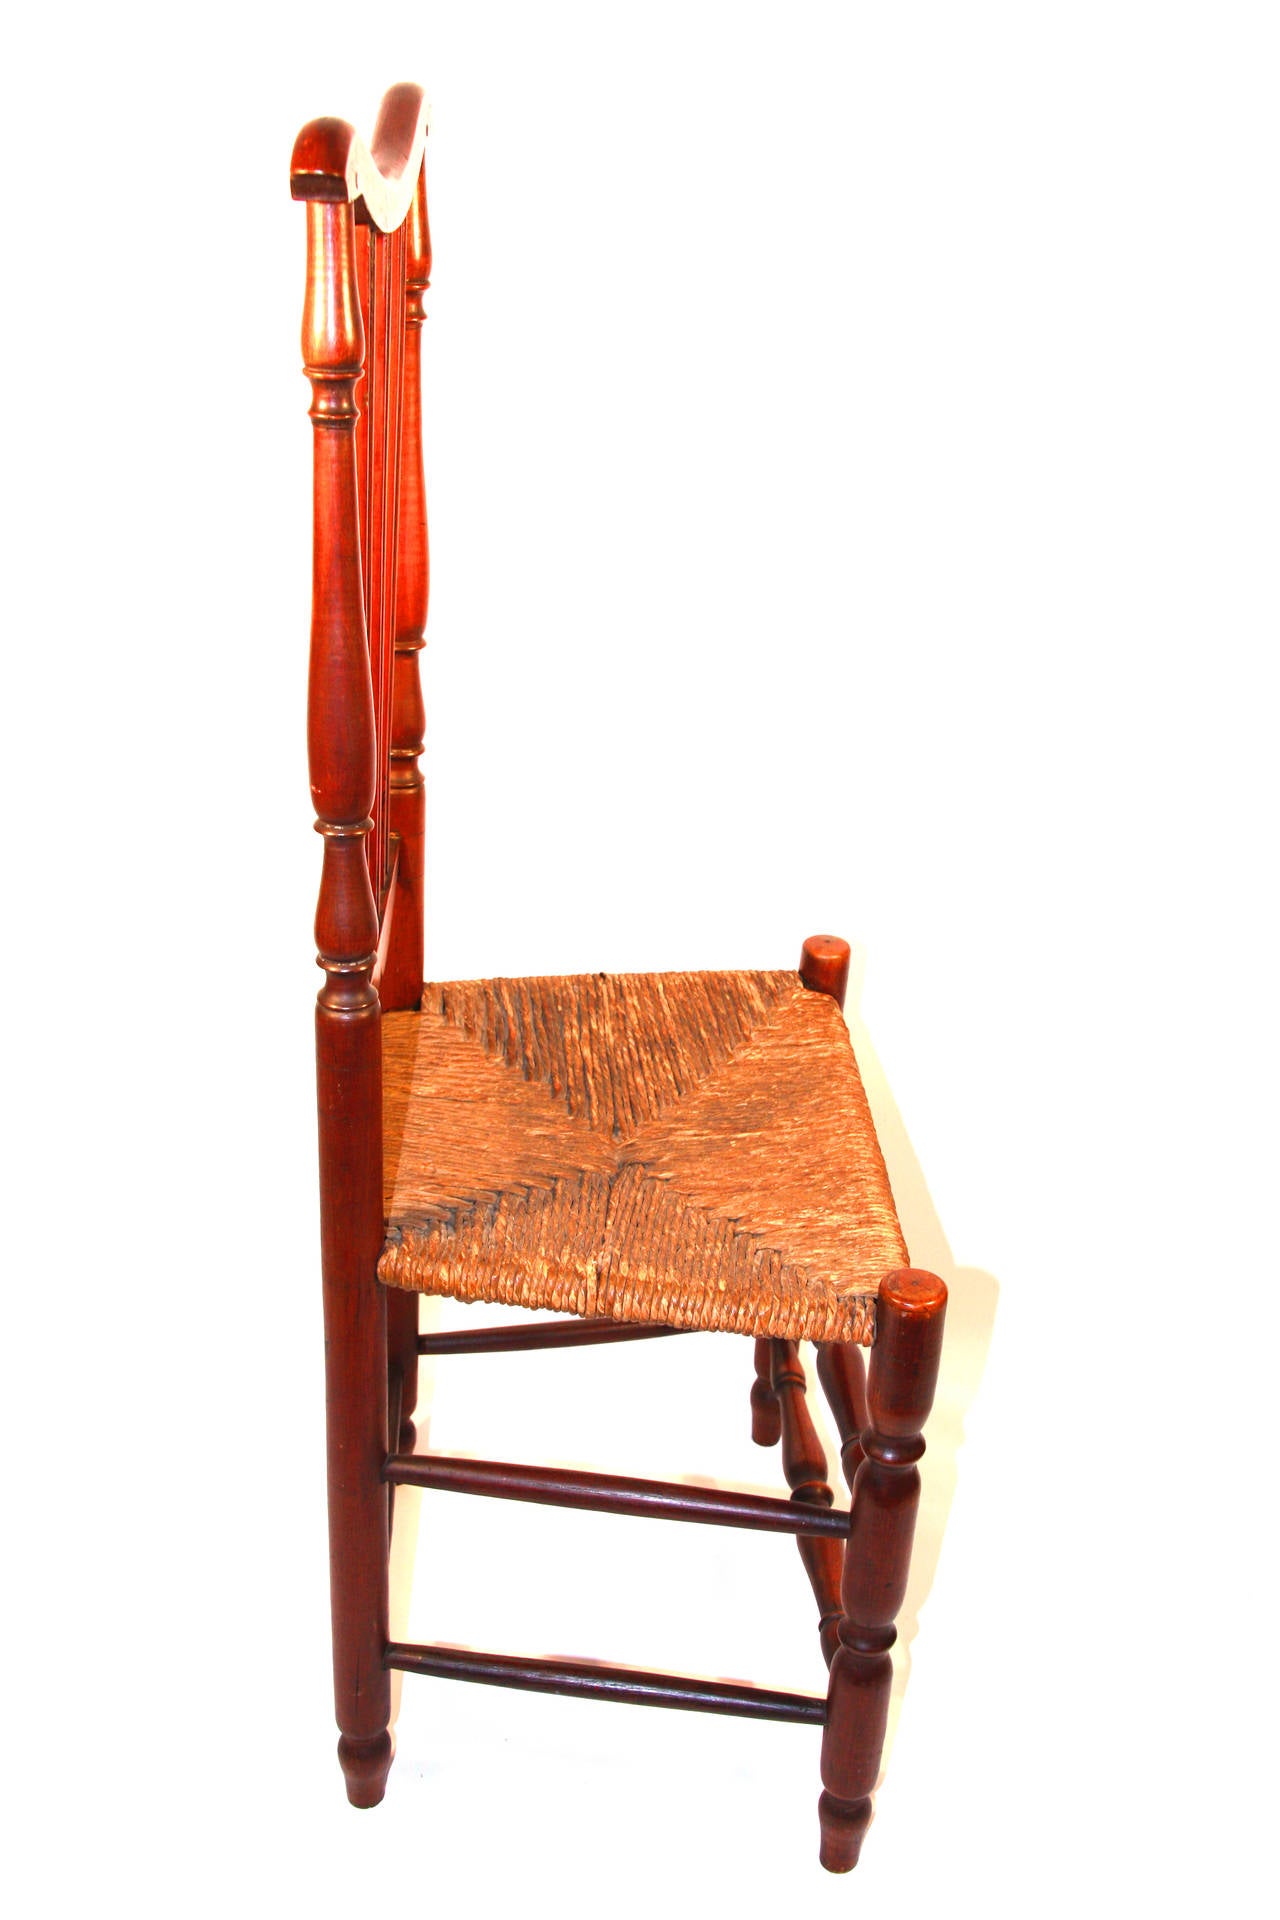 Pair of maple and ash or oak banister-back side chairs, the seat frame tenoned directly into the front legs which extend upward beyond the rush street.  Rear posts composed of  series of three stacked baluster turnings of different sizes above a